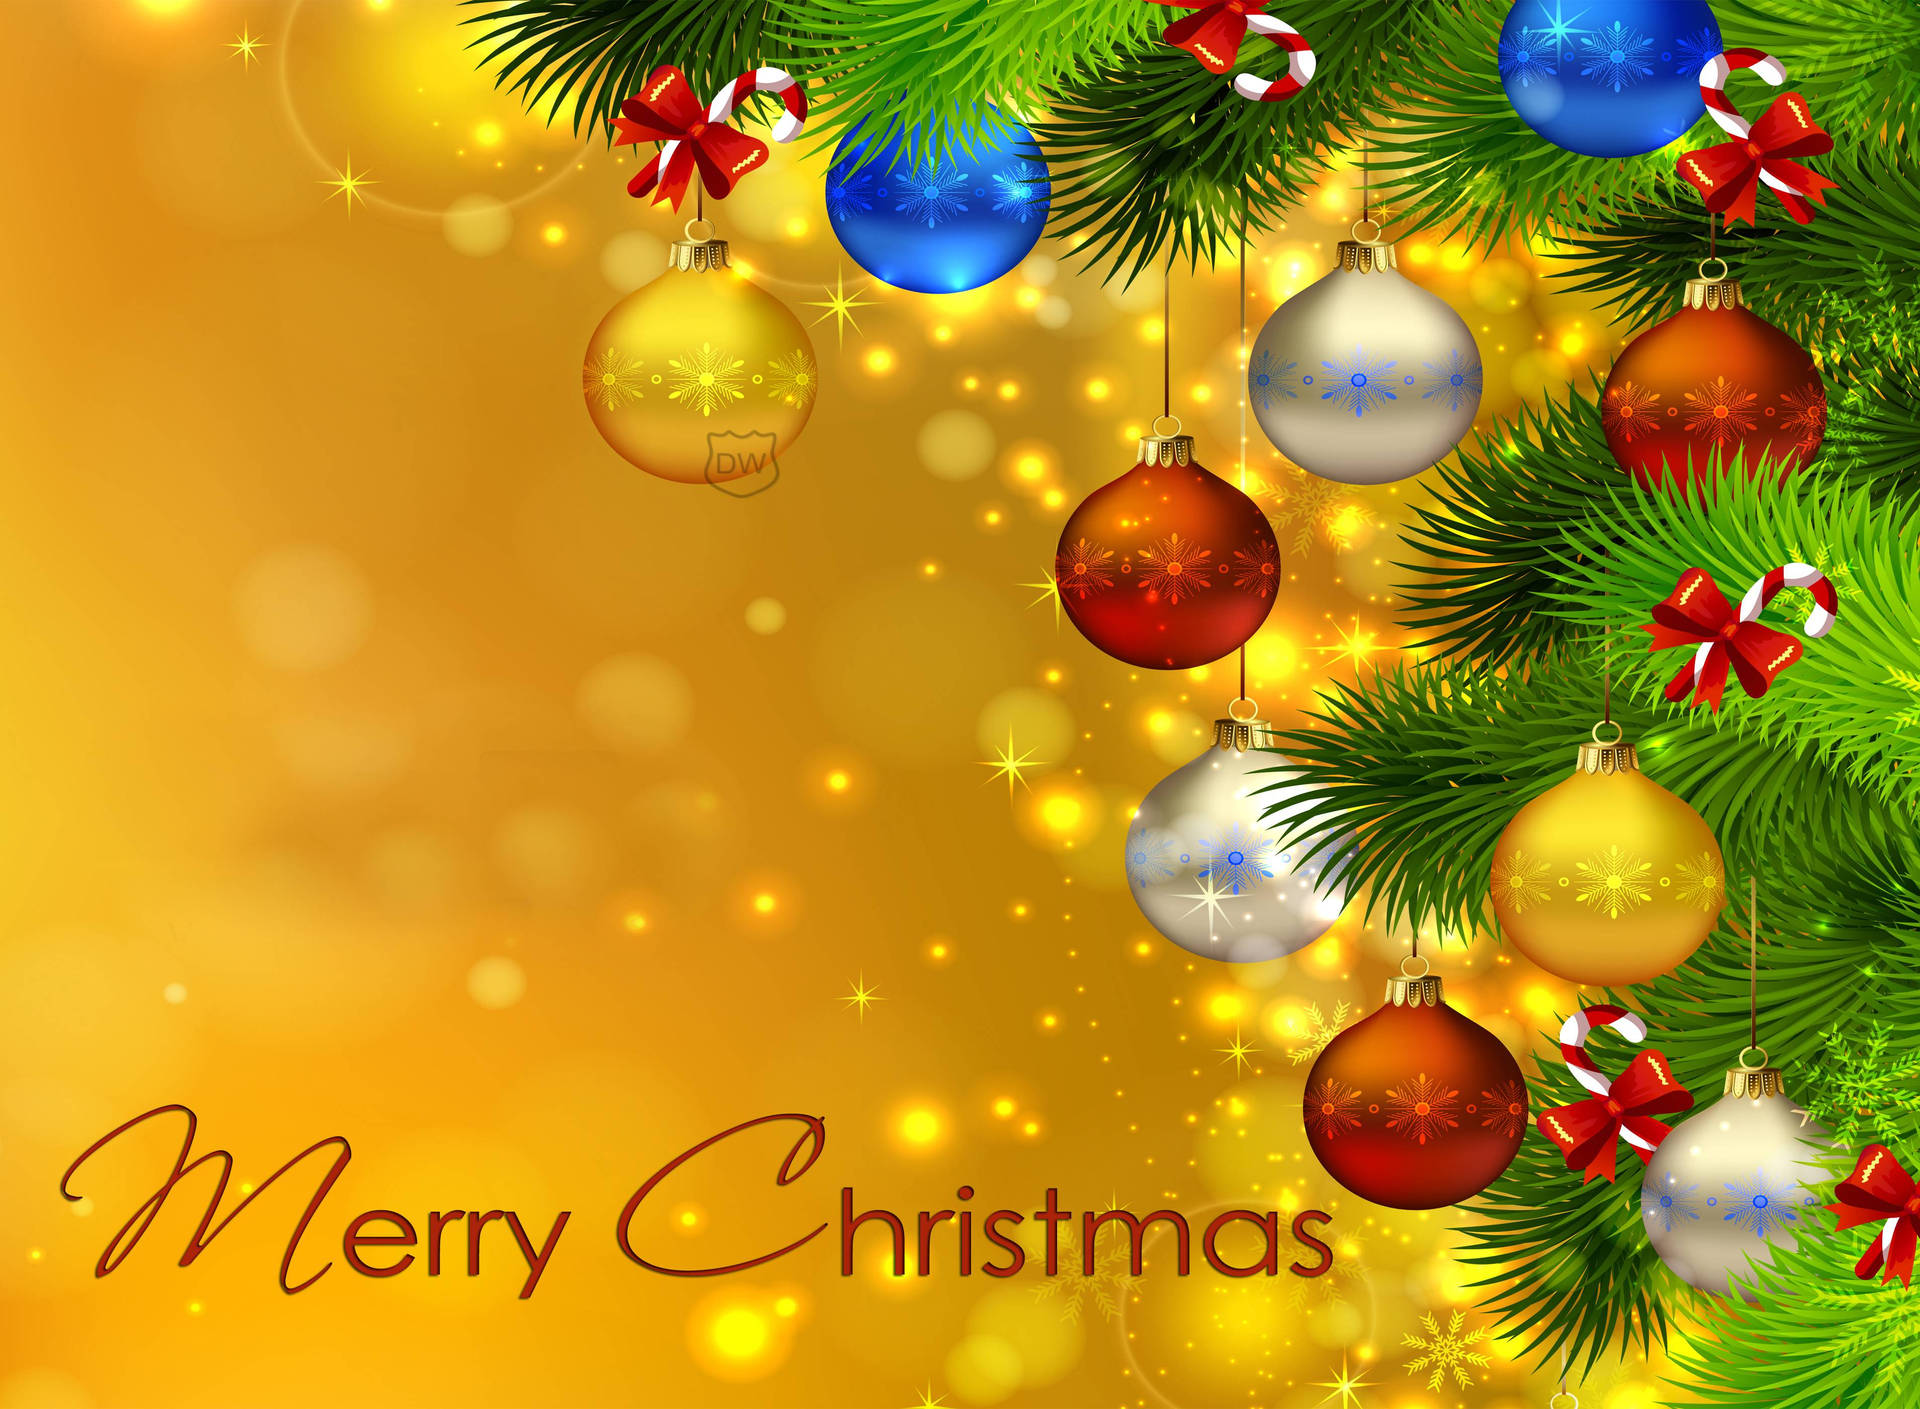 Wishing You A Merry & Bright Christmas! Background